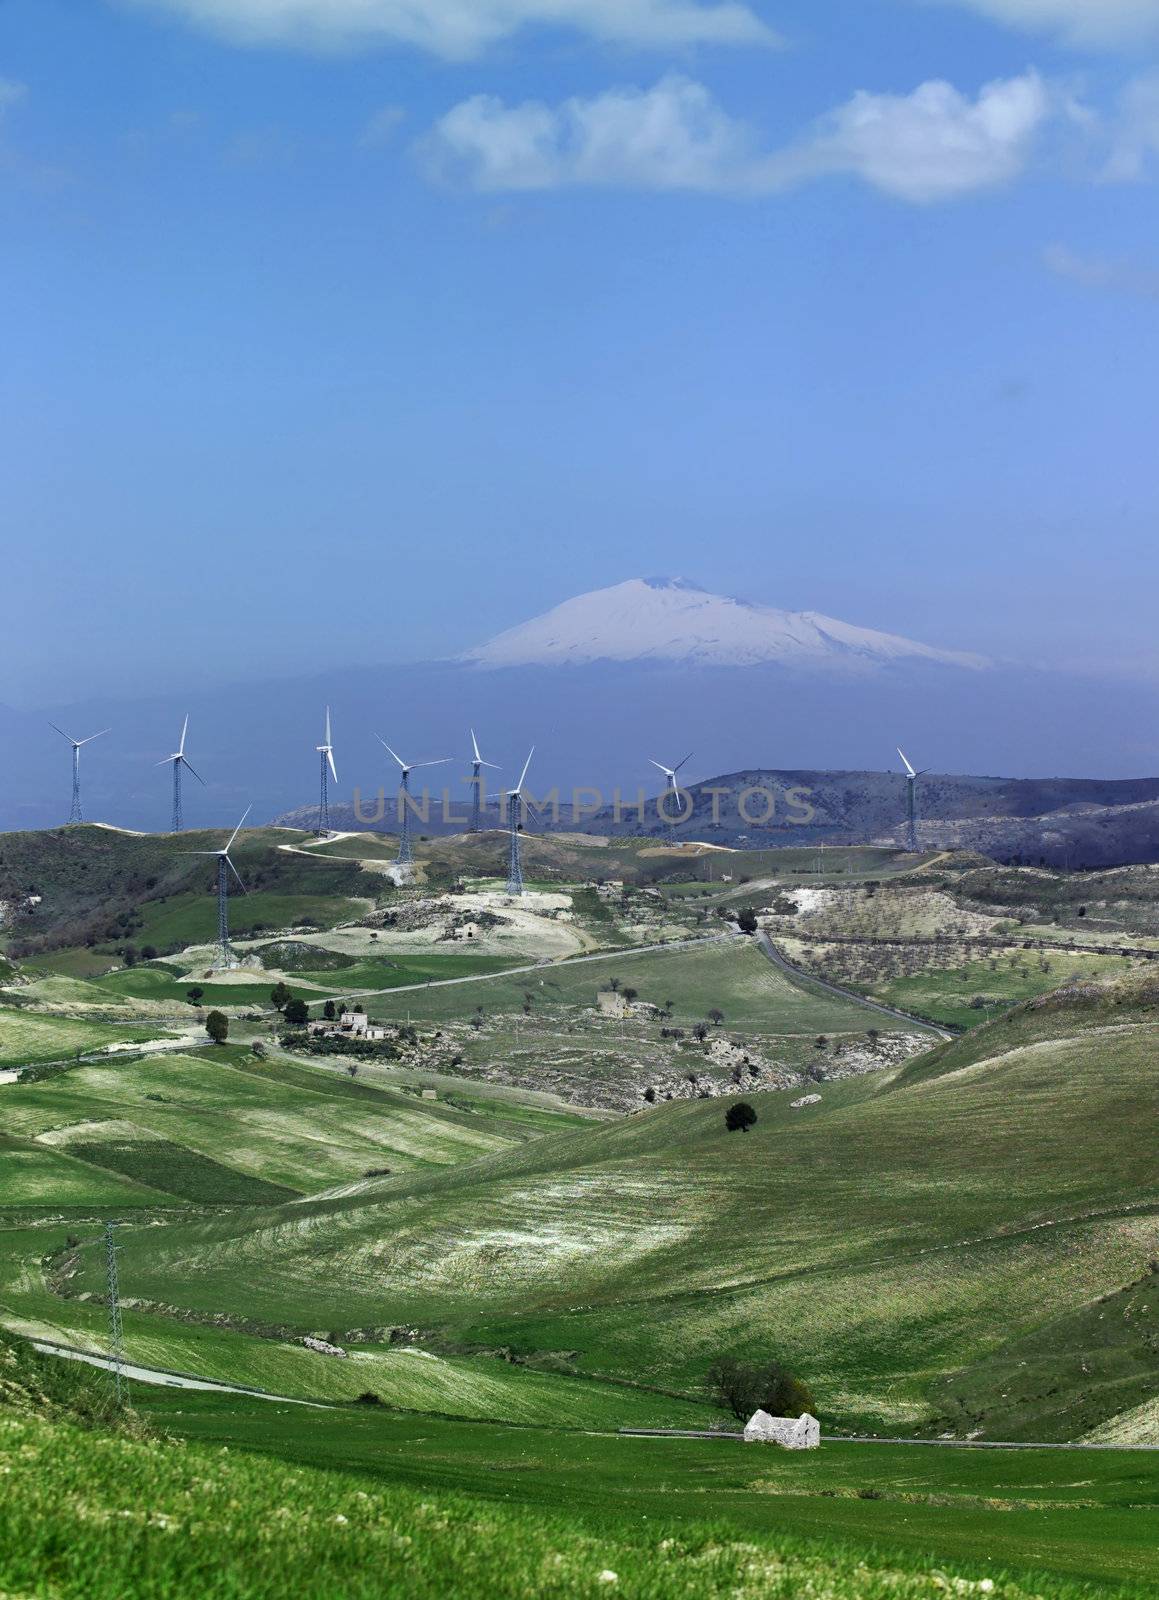 ITALY, Sicily, Francofonte/Catania province, countryside, Eolic energy turbines, the volcano Etna in the background